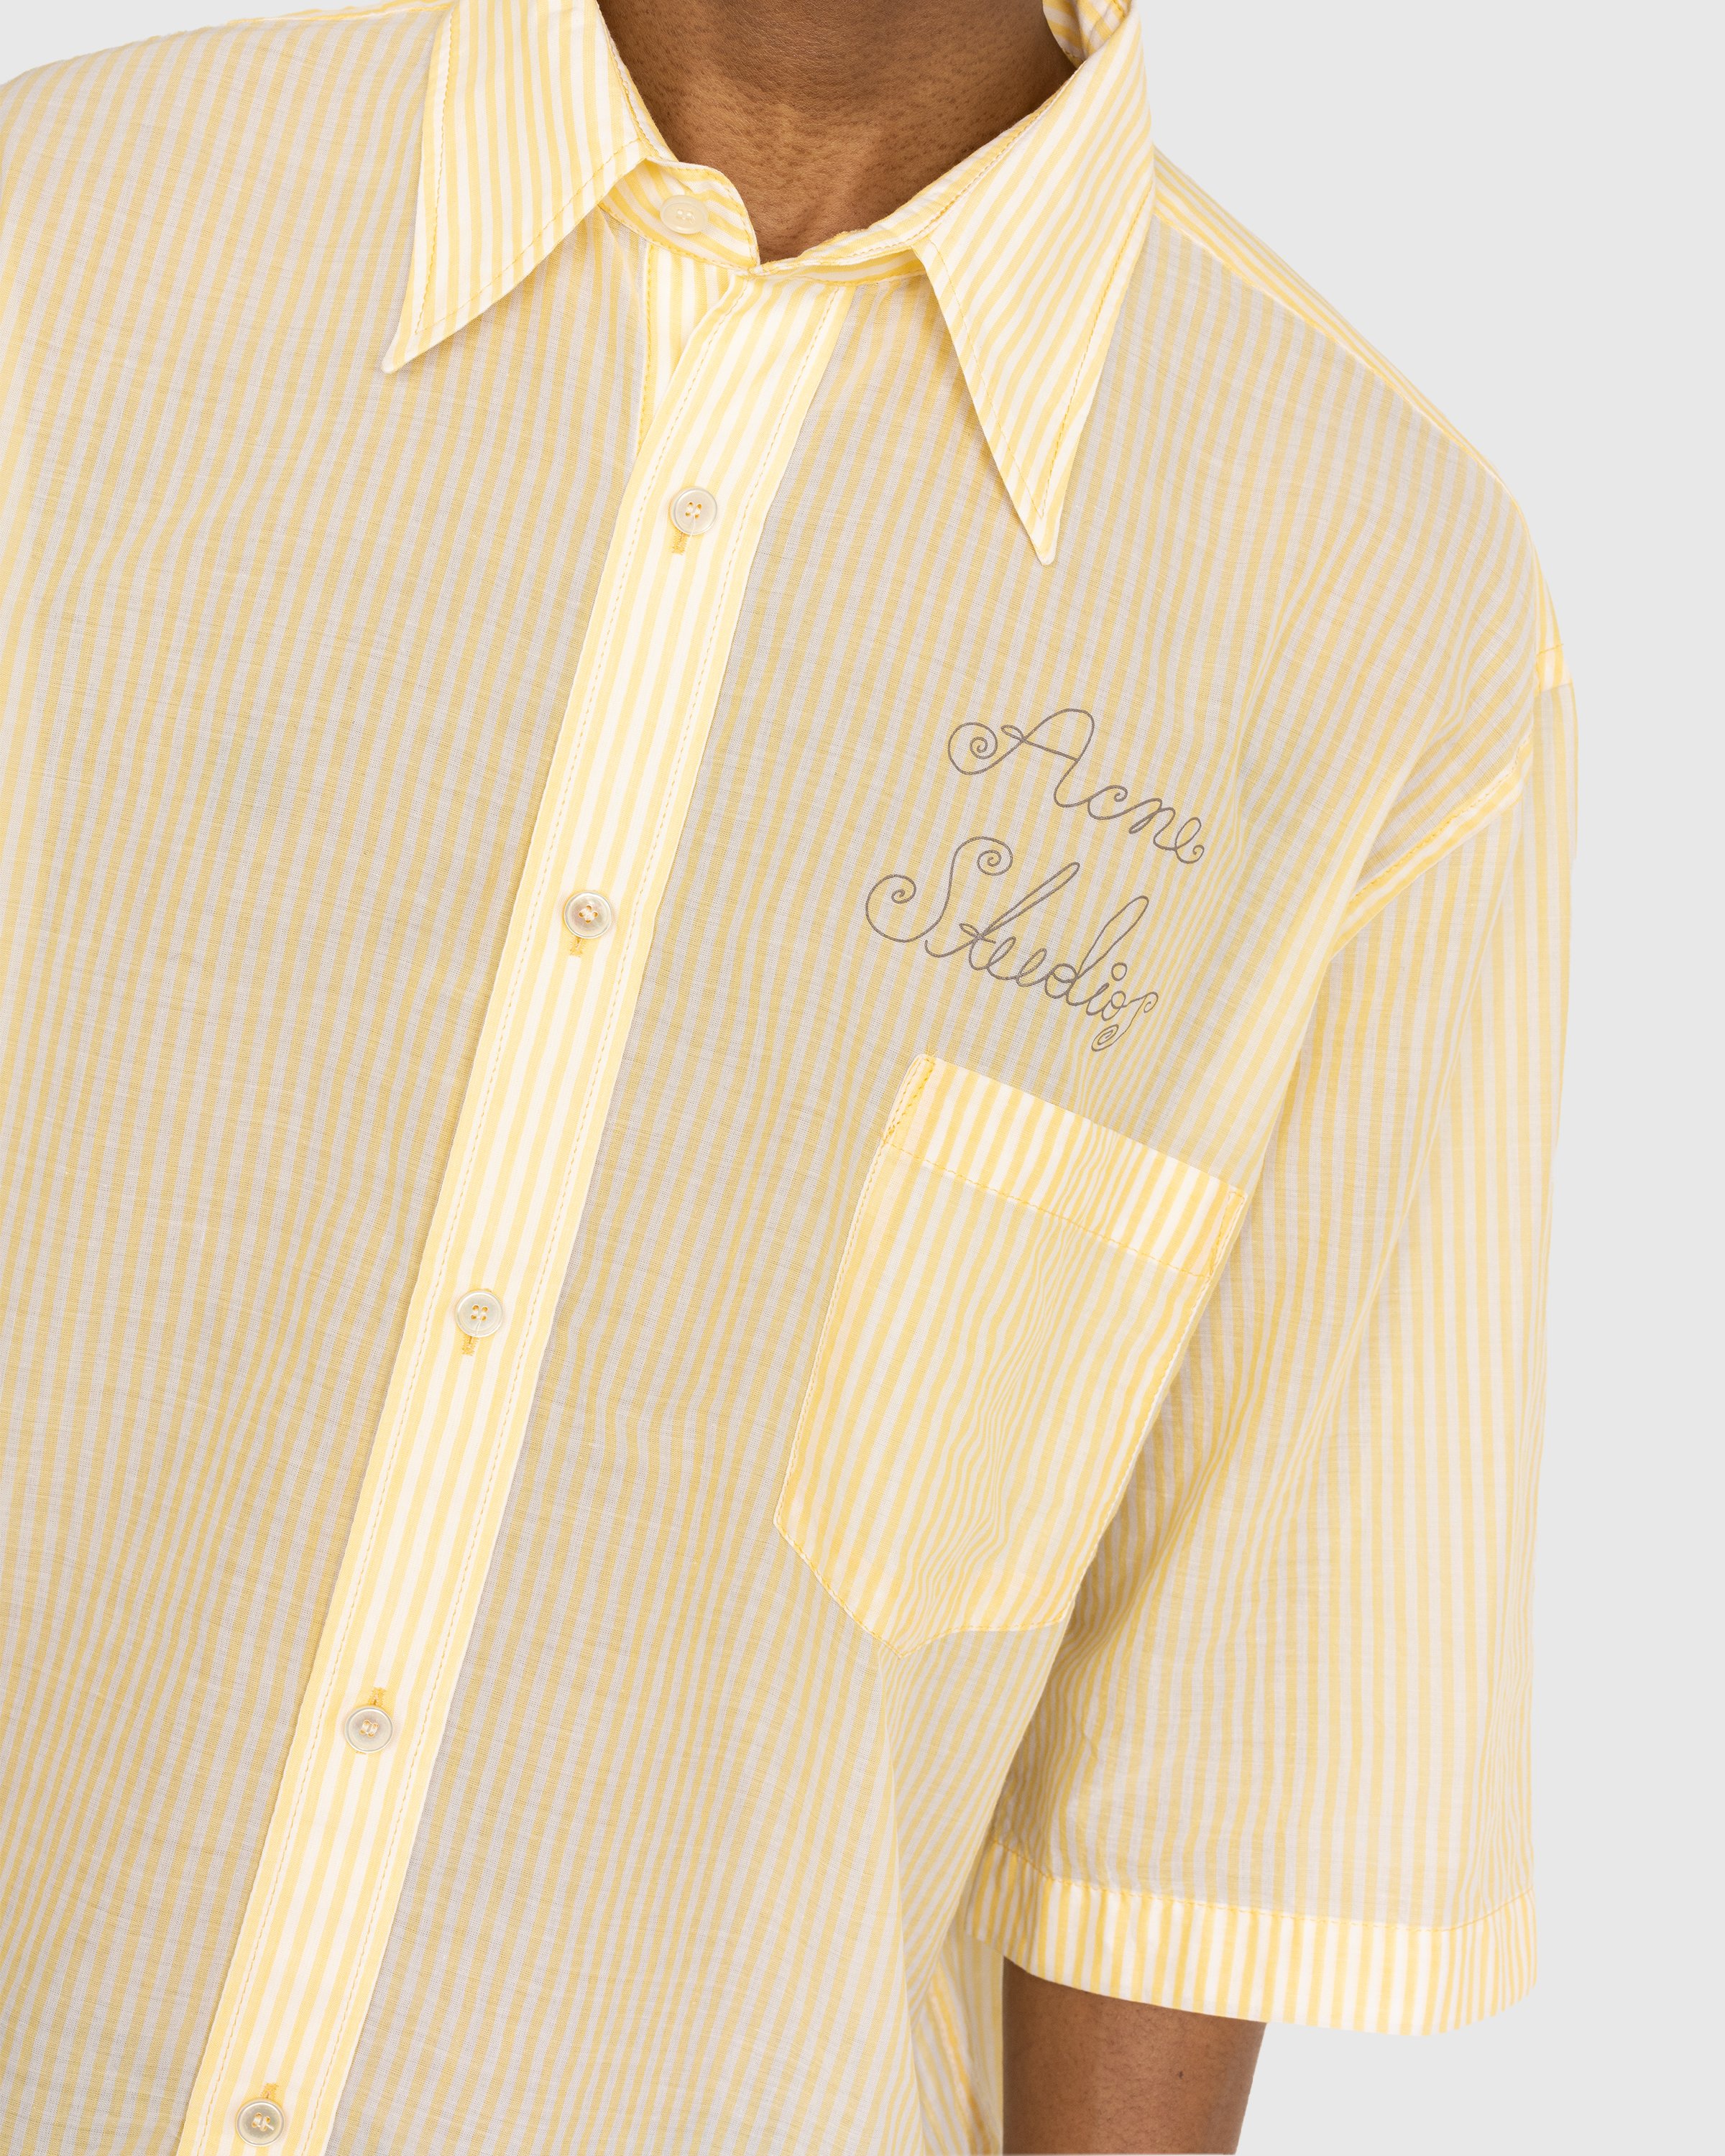 Acne Studios - Short Sleeve Button-Up Shirt Yellow - Clothing - Yellow - Image 4